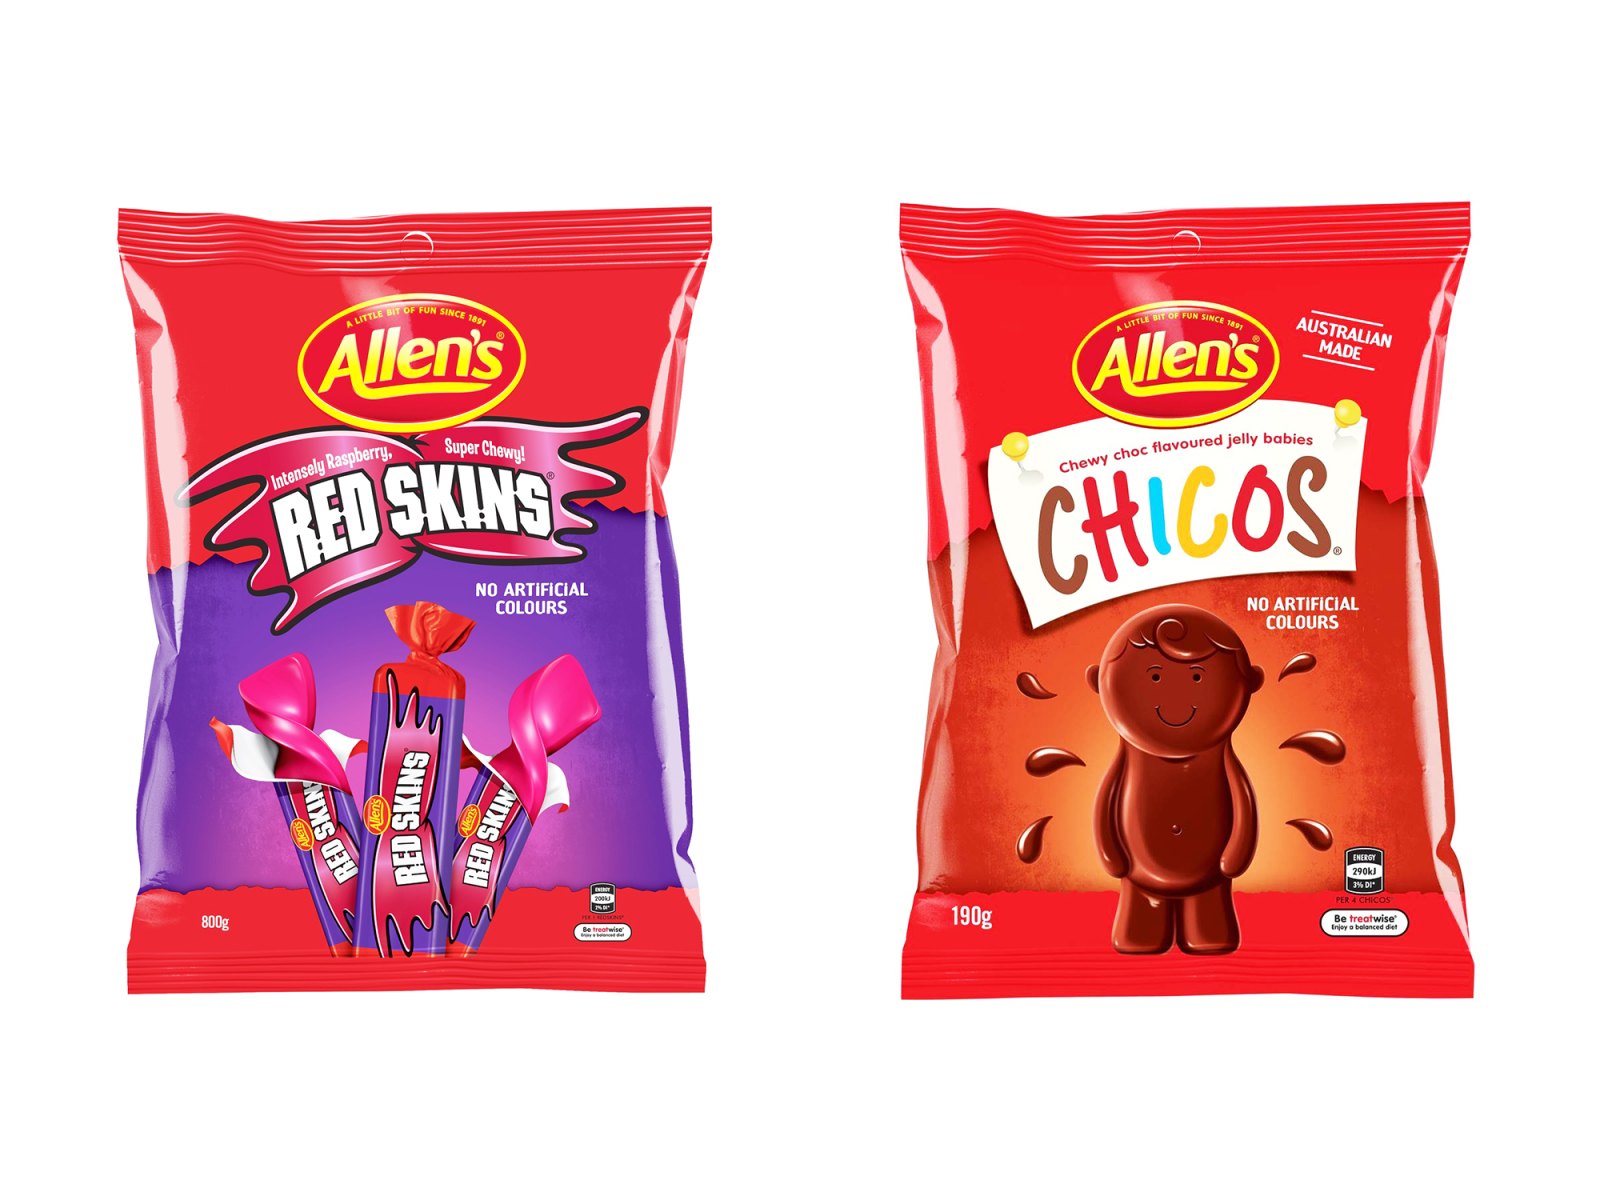 Allens Red Skins and Chicos Food Brands Step Up to Change Their Racially Insensitive Names